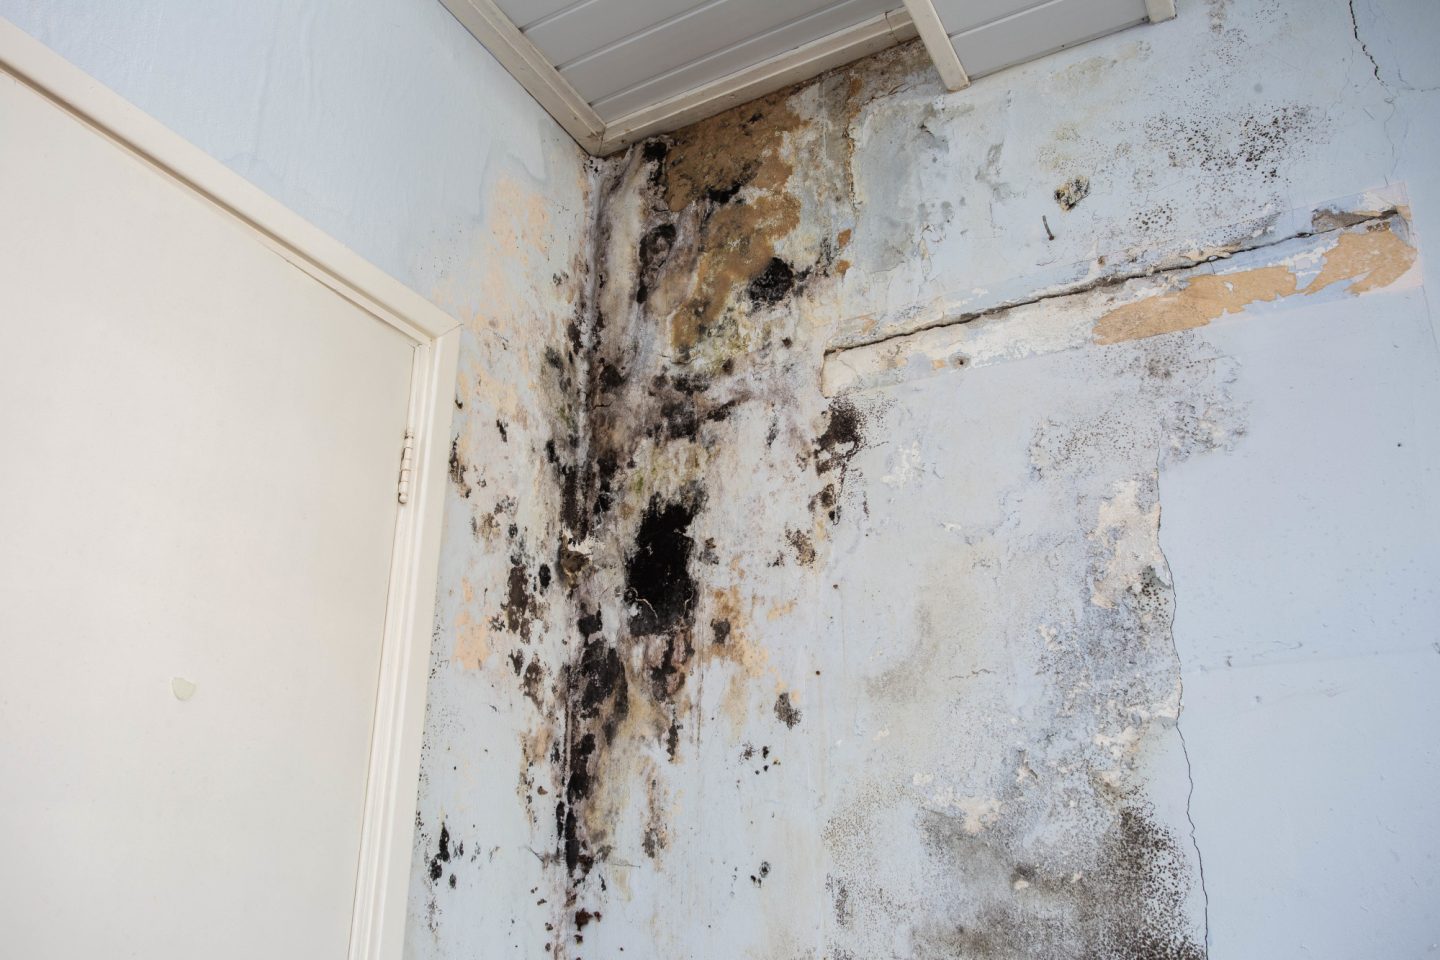 8 Maintenance Tips to Help Prevent Mold at Home